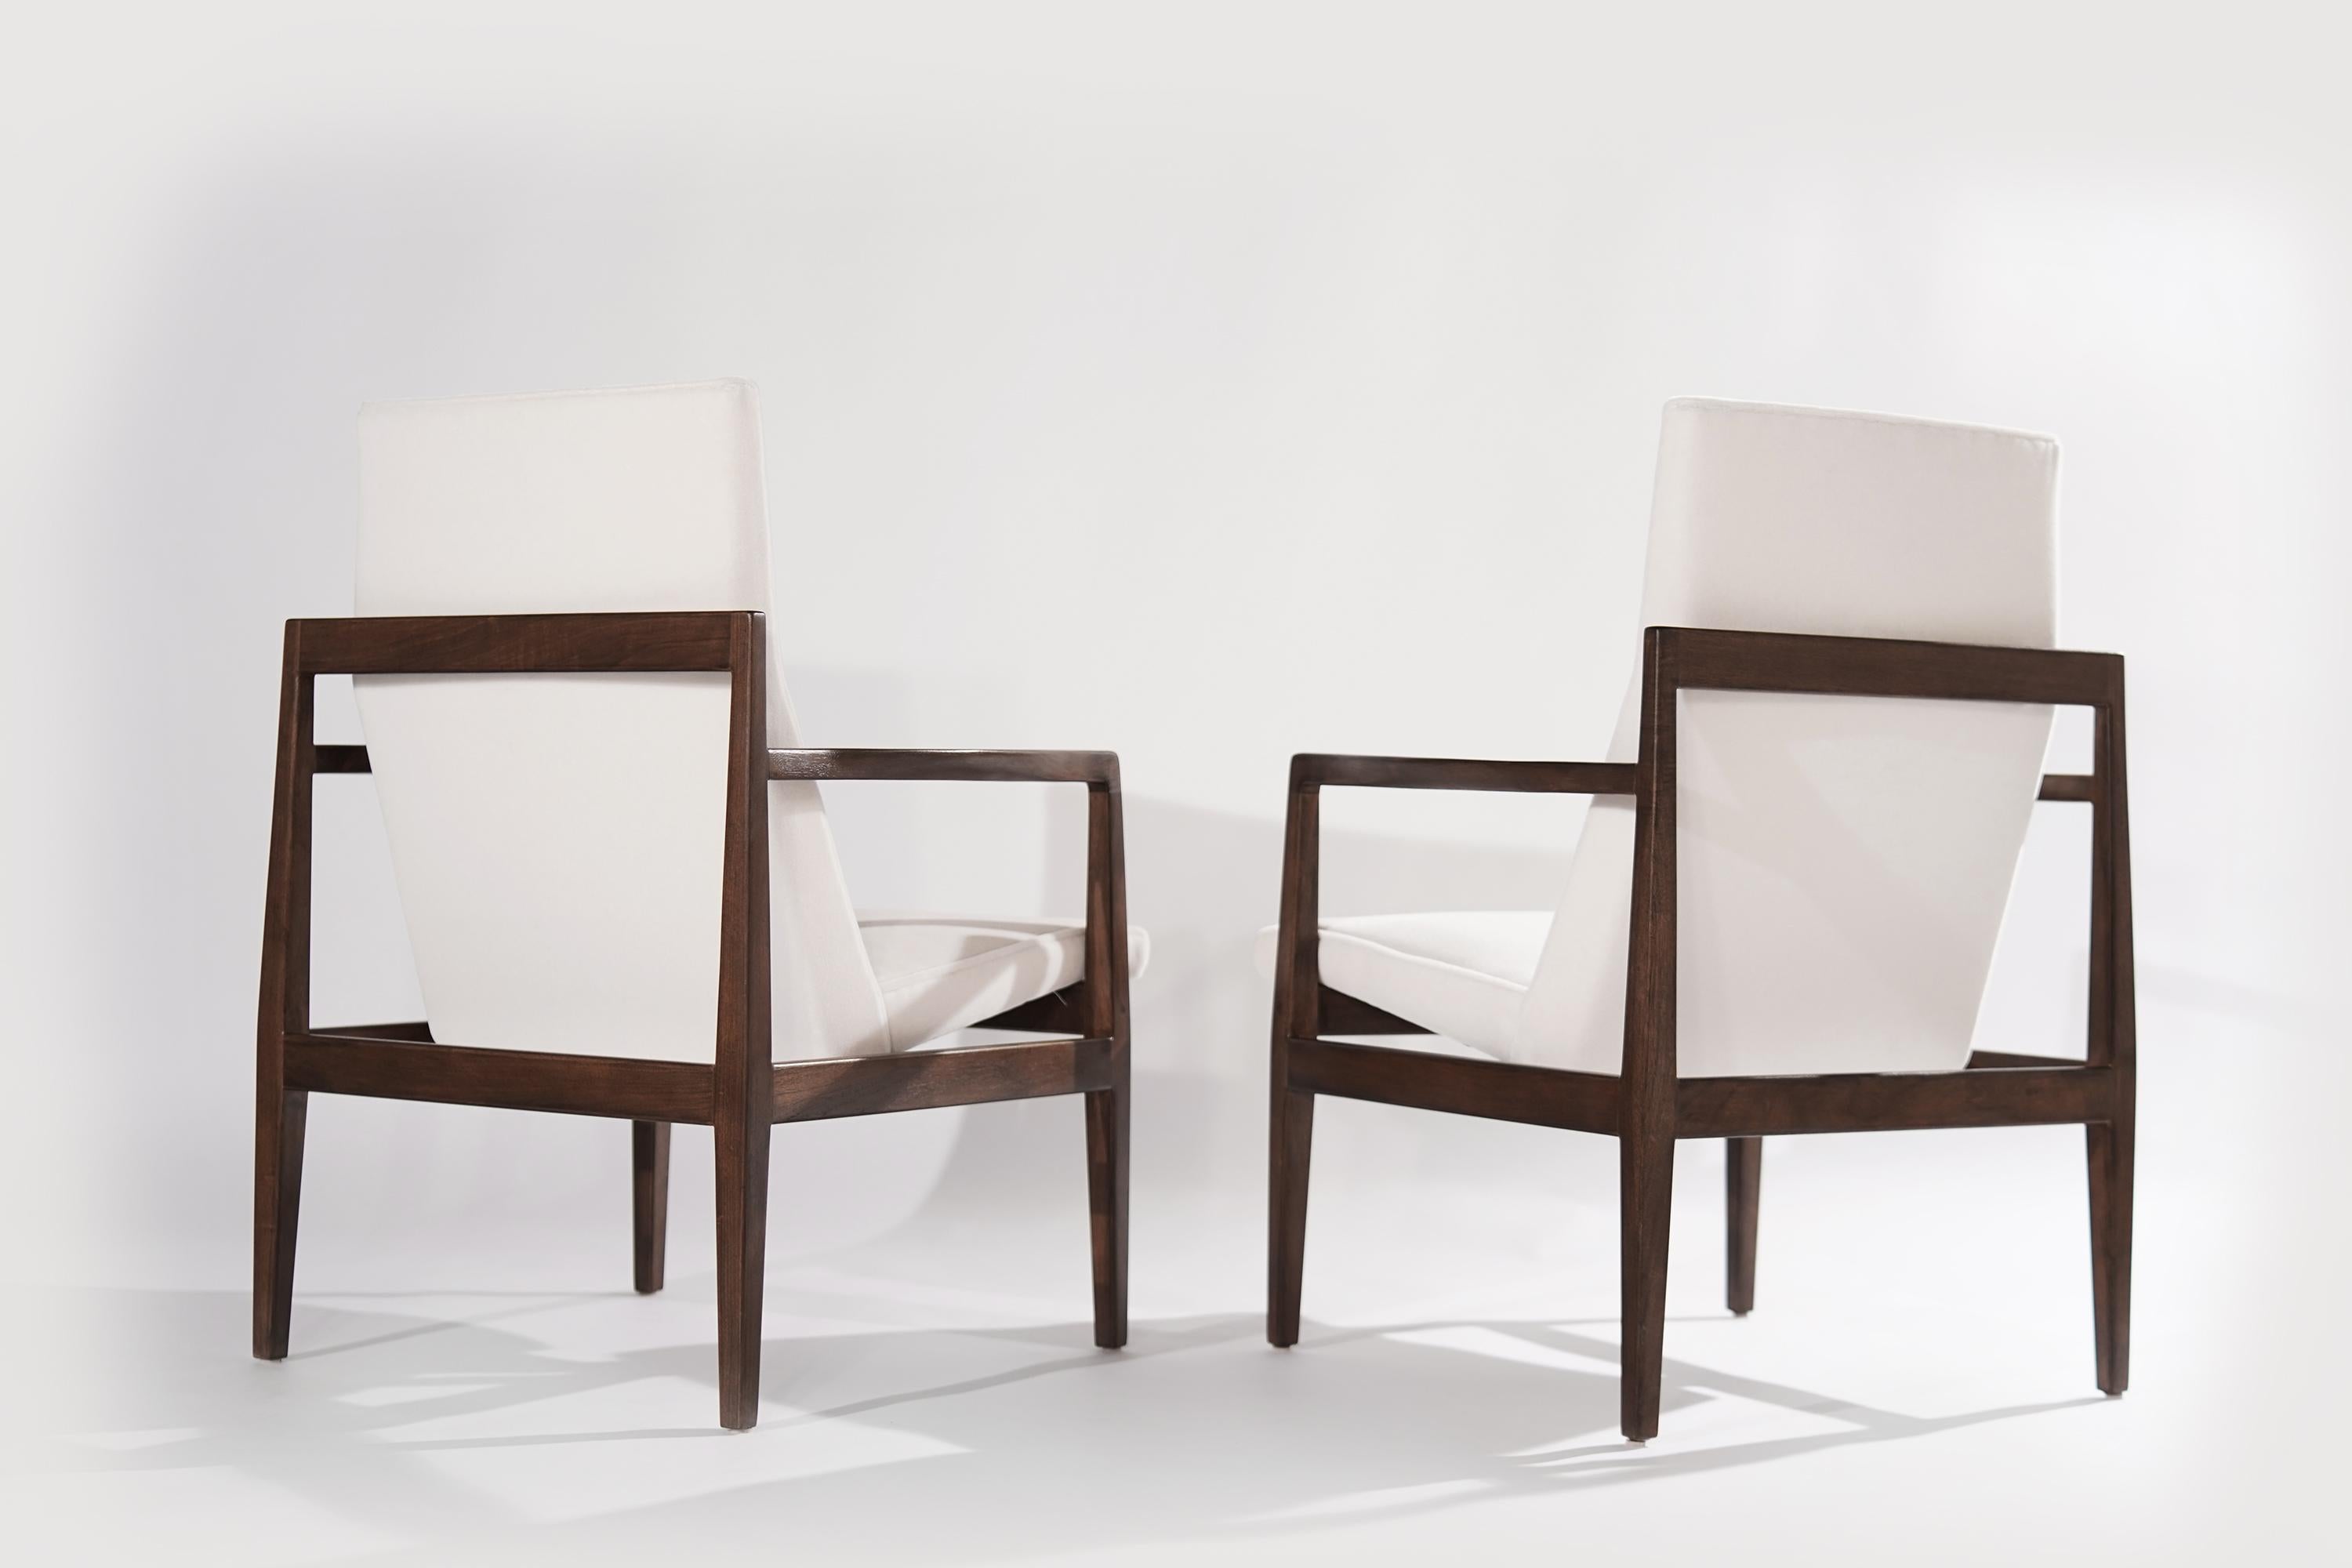 American Set of Lounge Chairs by Jens Risom, c. 1960s